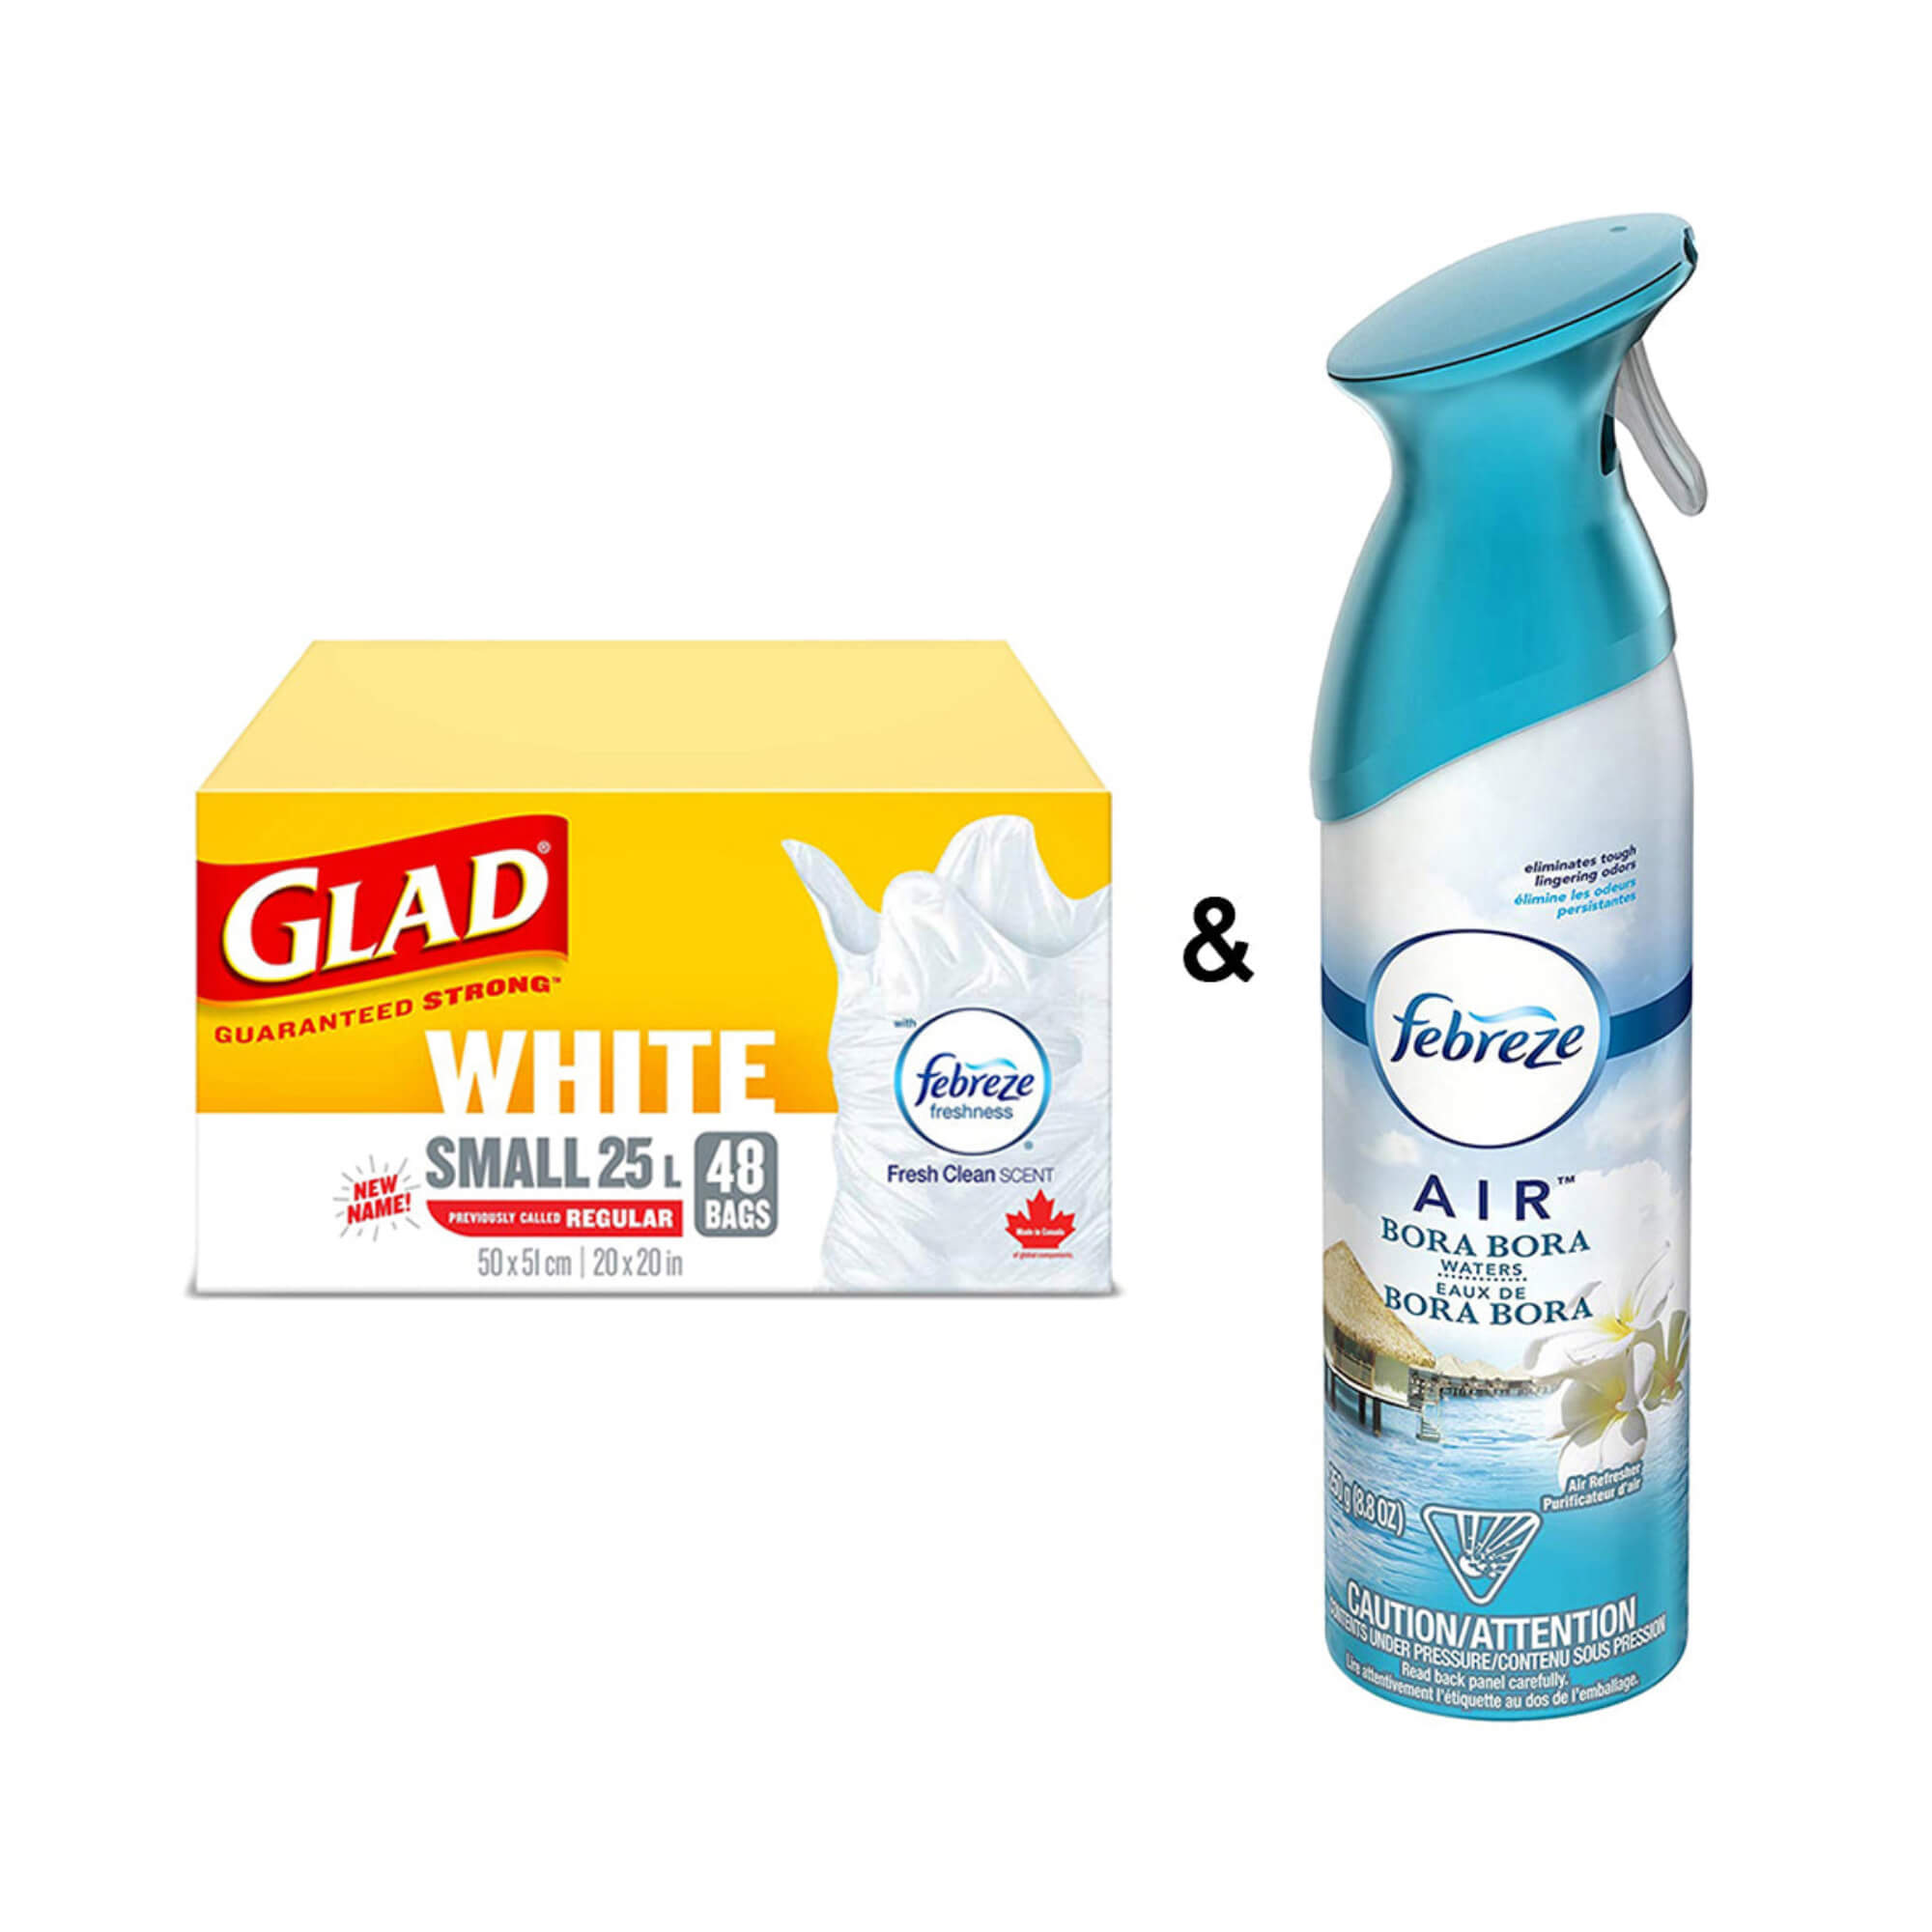 Air Freshener, & Glad White Garbage - Small 25 L, 48 Bags